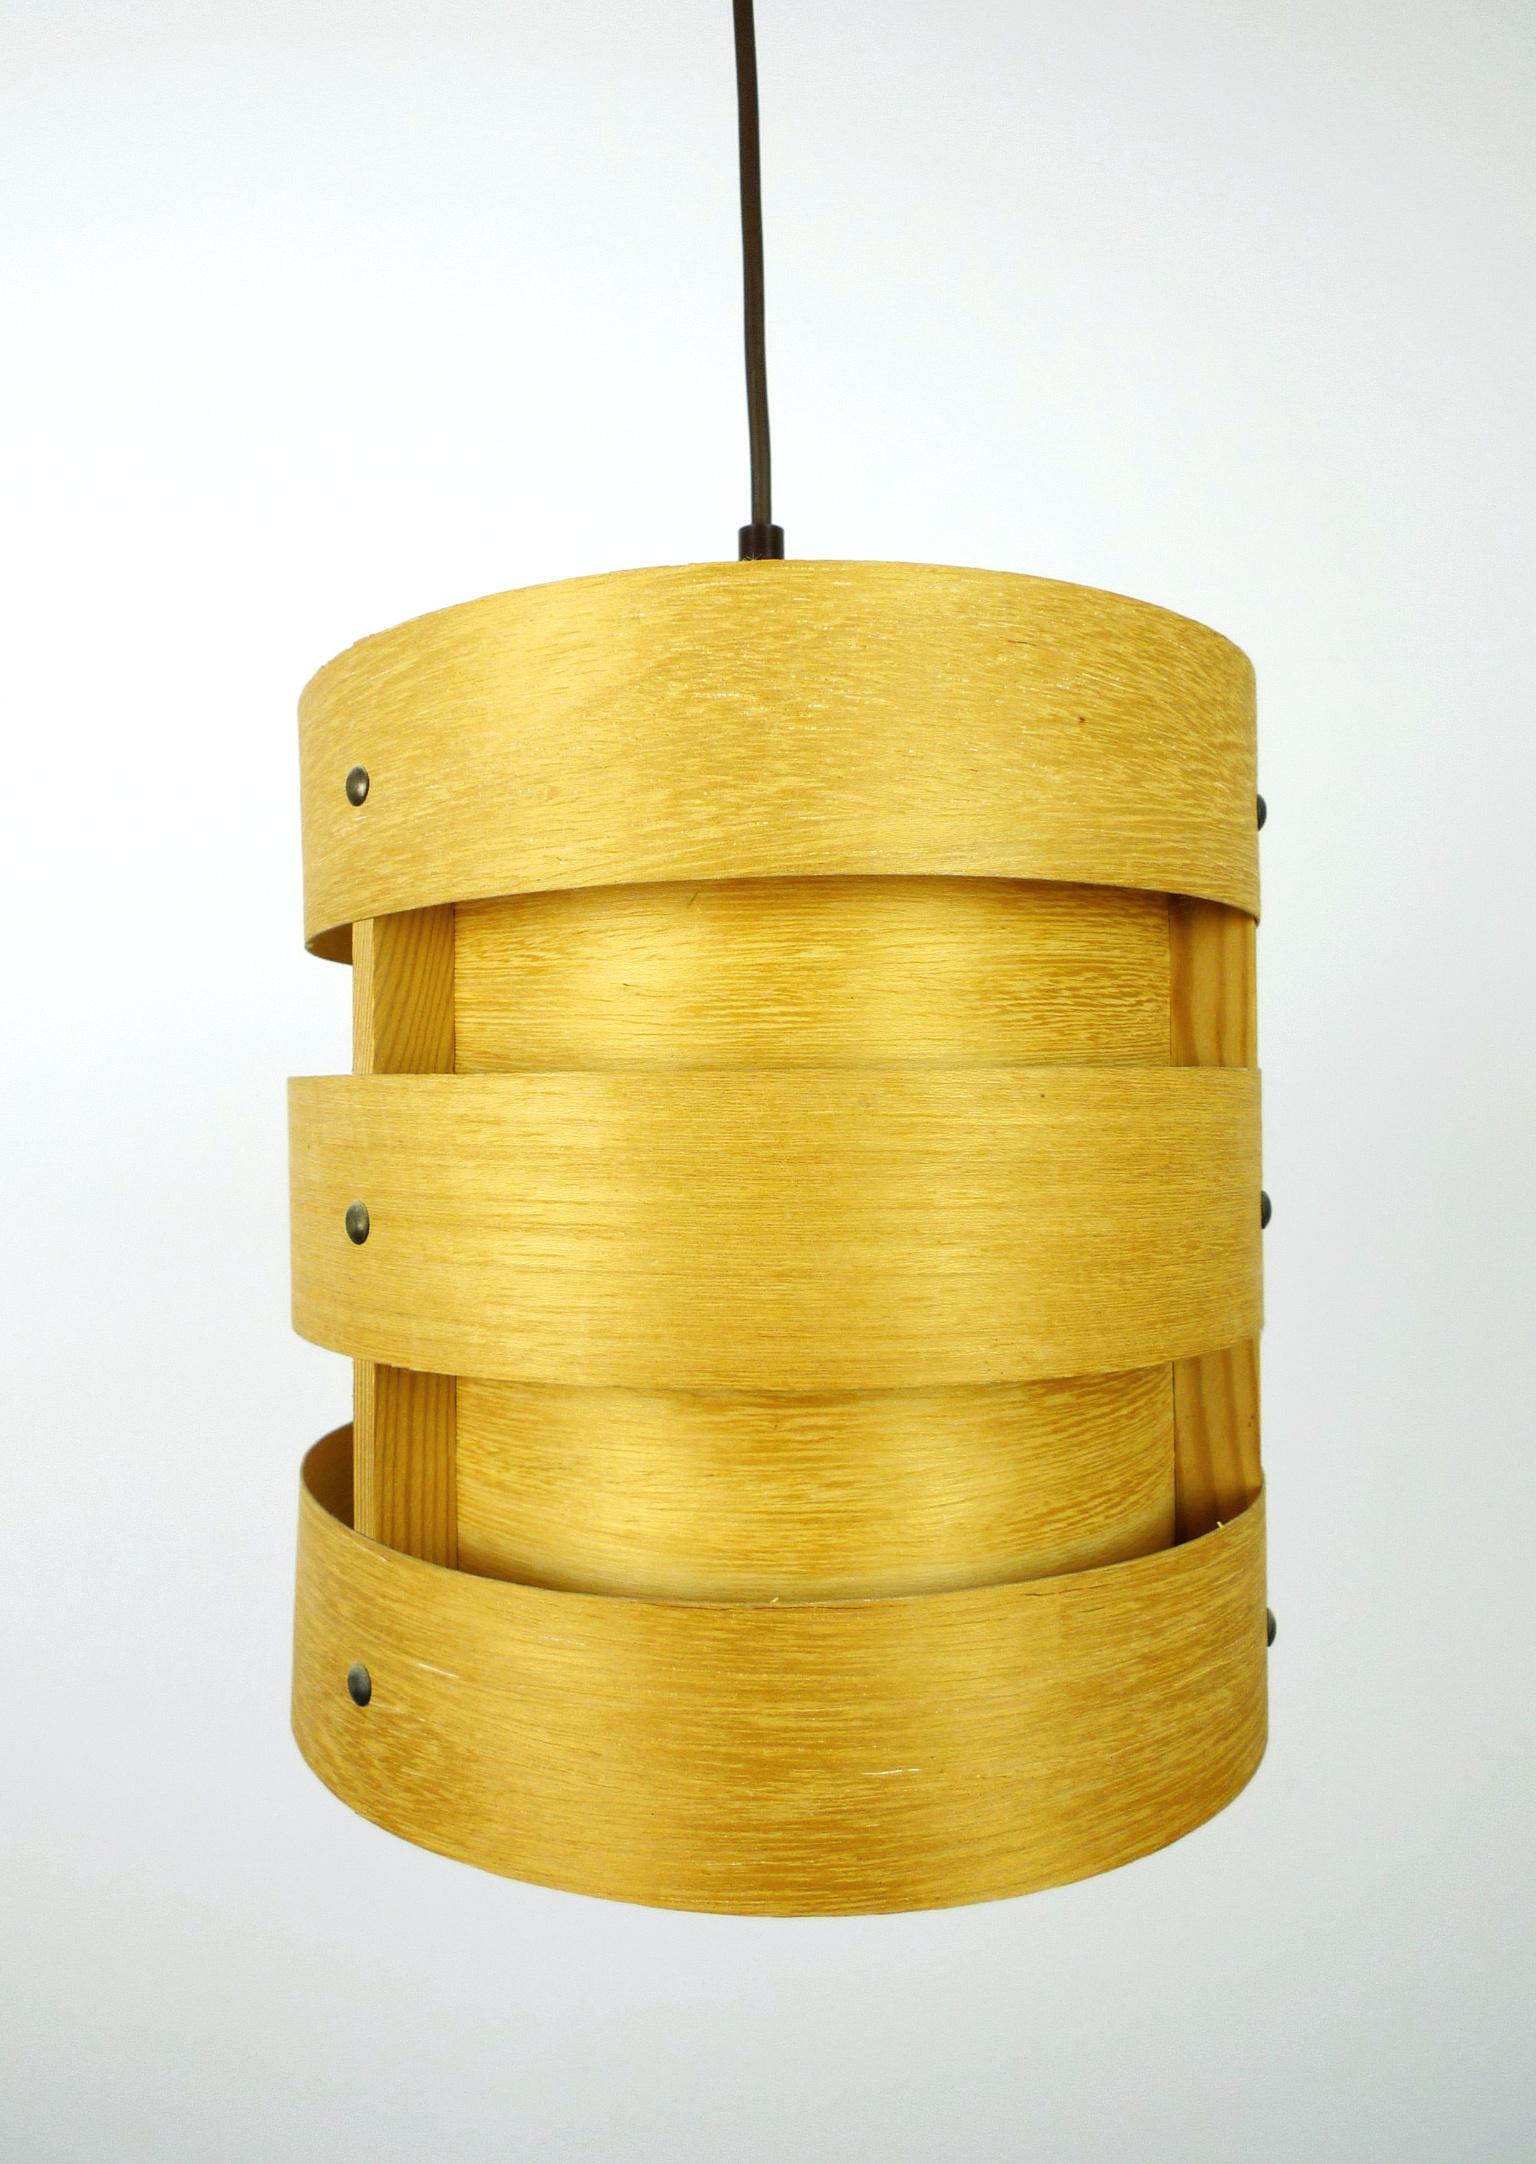 Ceiling light from the German manufacturer Zicoli from the 1970s. The lamp consists of five overlapping veneer strips of ash wood, which are connected by narrow pine wood strips. The lamp has an E 27 bulb socket and it is in very good condition.